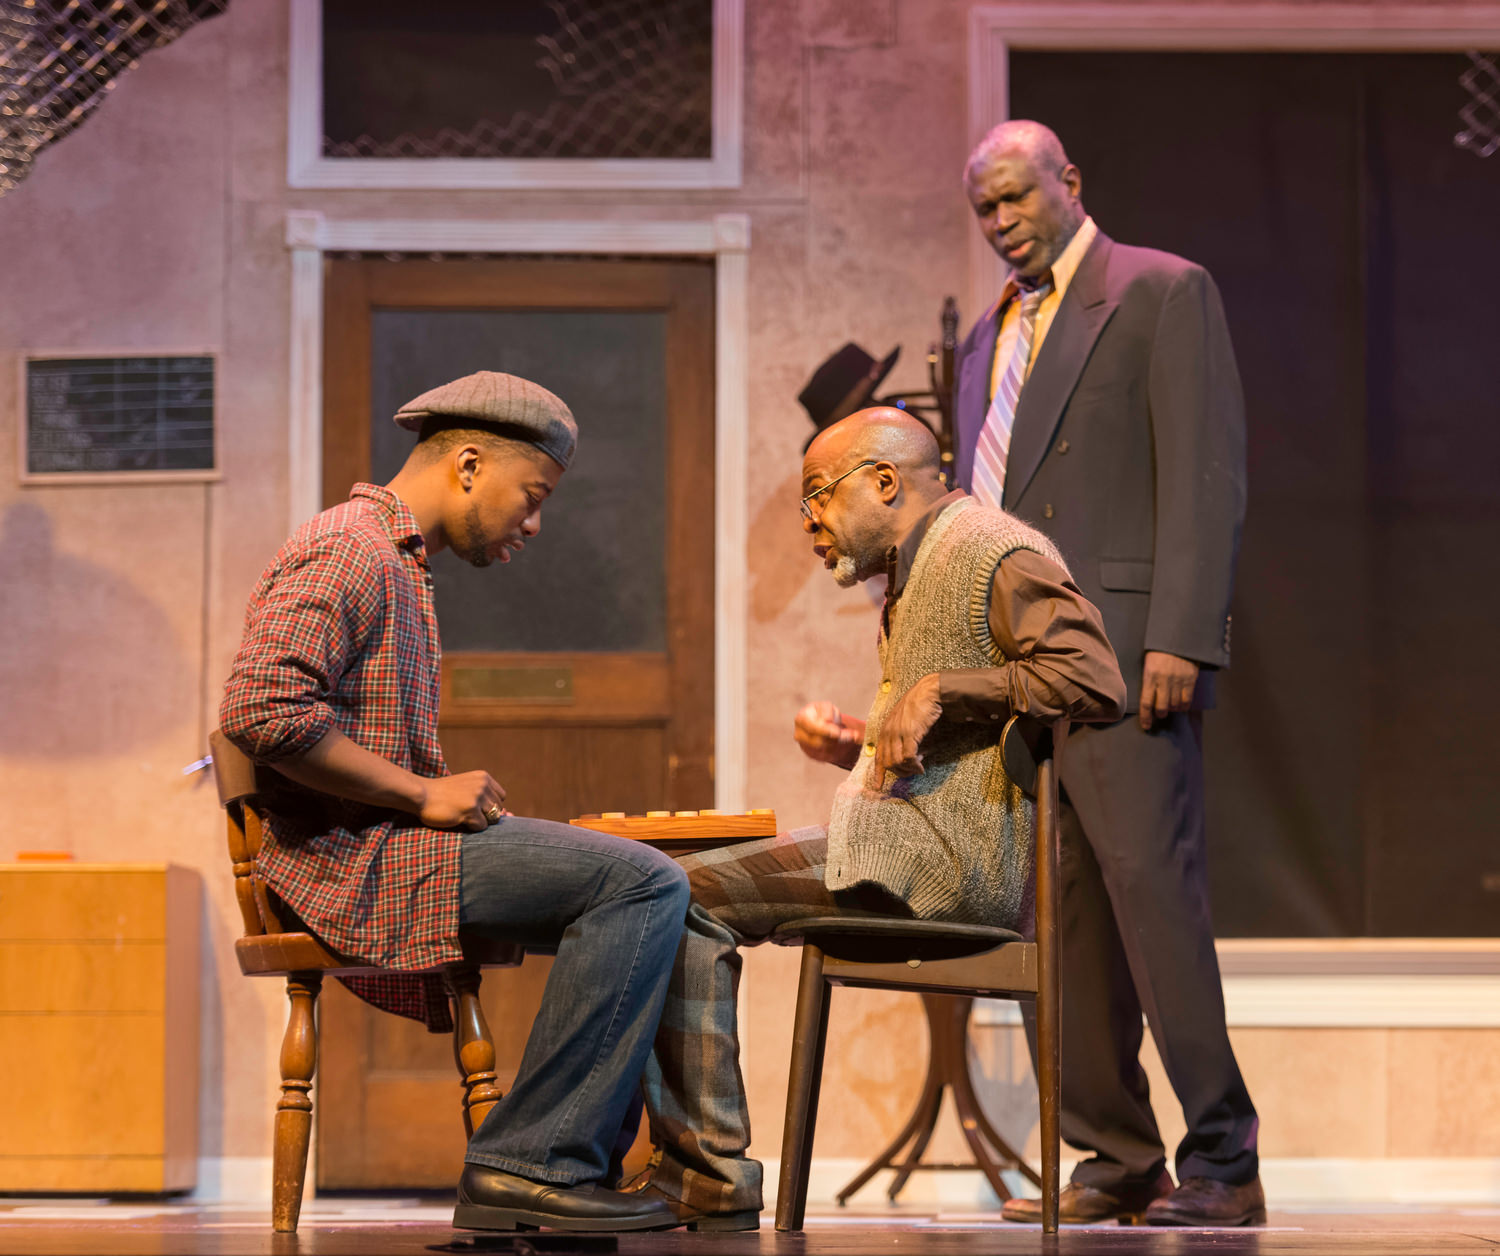 ShawnJ West (Turnbo), L. Peter Callender (Becker), and Edward Neville Ewell (Youngblood) in African-American Shakespeare Company’s production of ‘Jitney’, directed by L. Peter Callender; photo credit: Lance Huntley 2